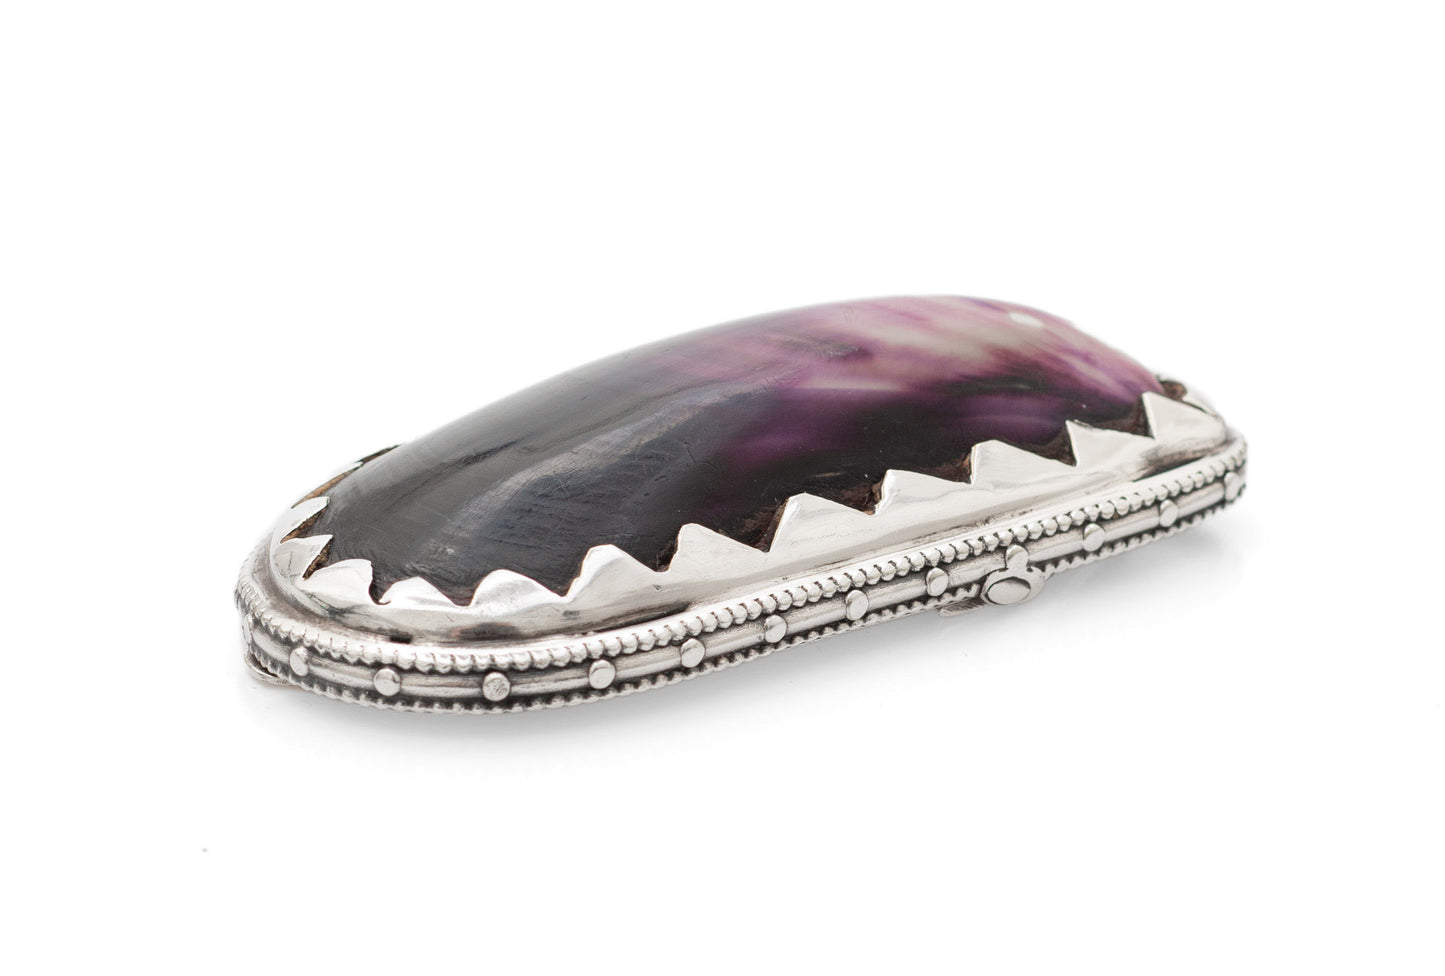 Antique Georgian Silver & Polished Natural Mussel Shell Snuff Box c1820 (Code 2447)